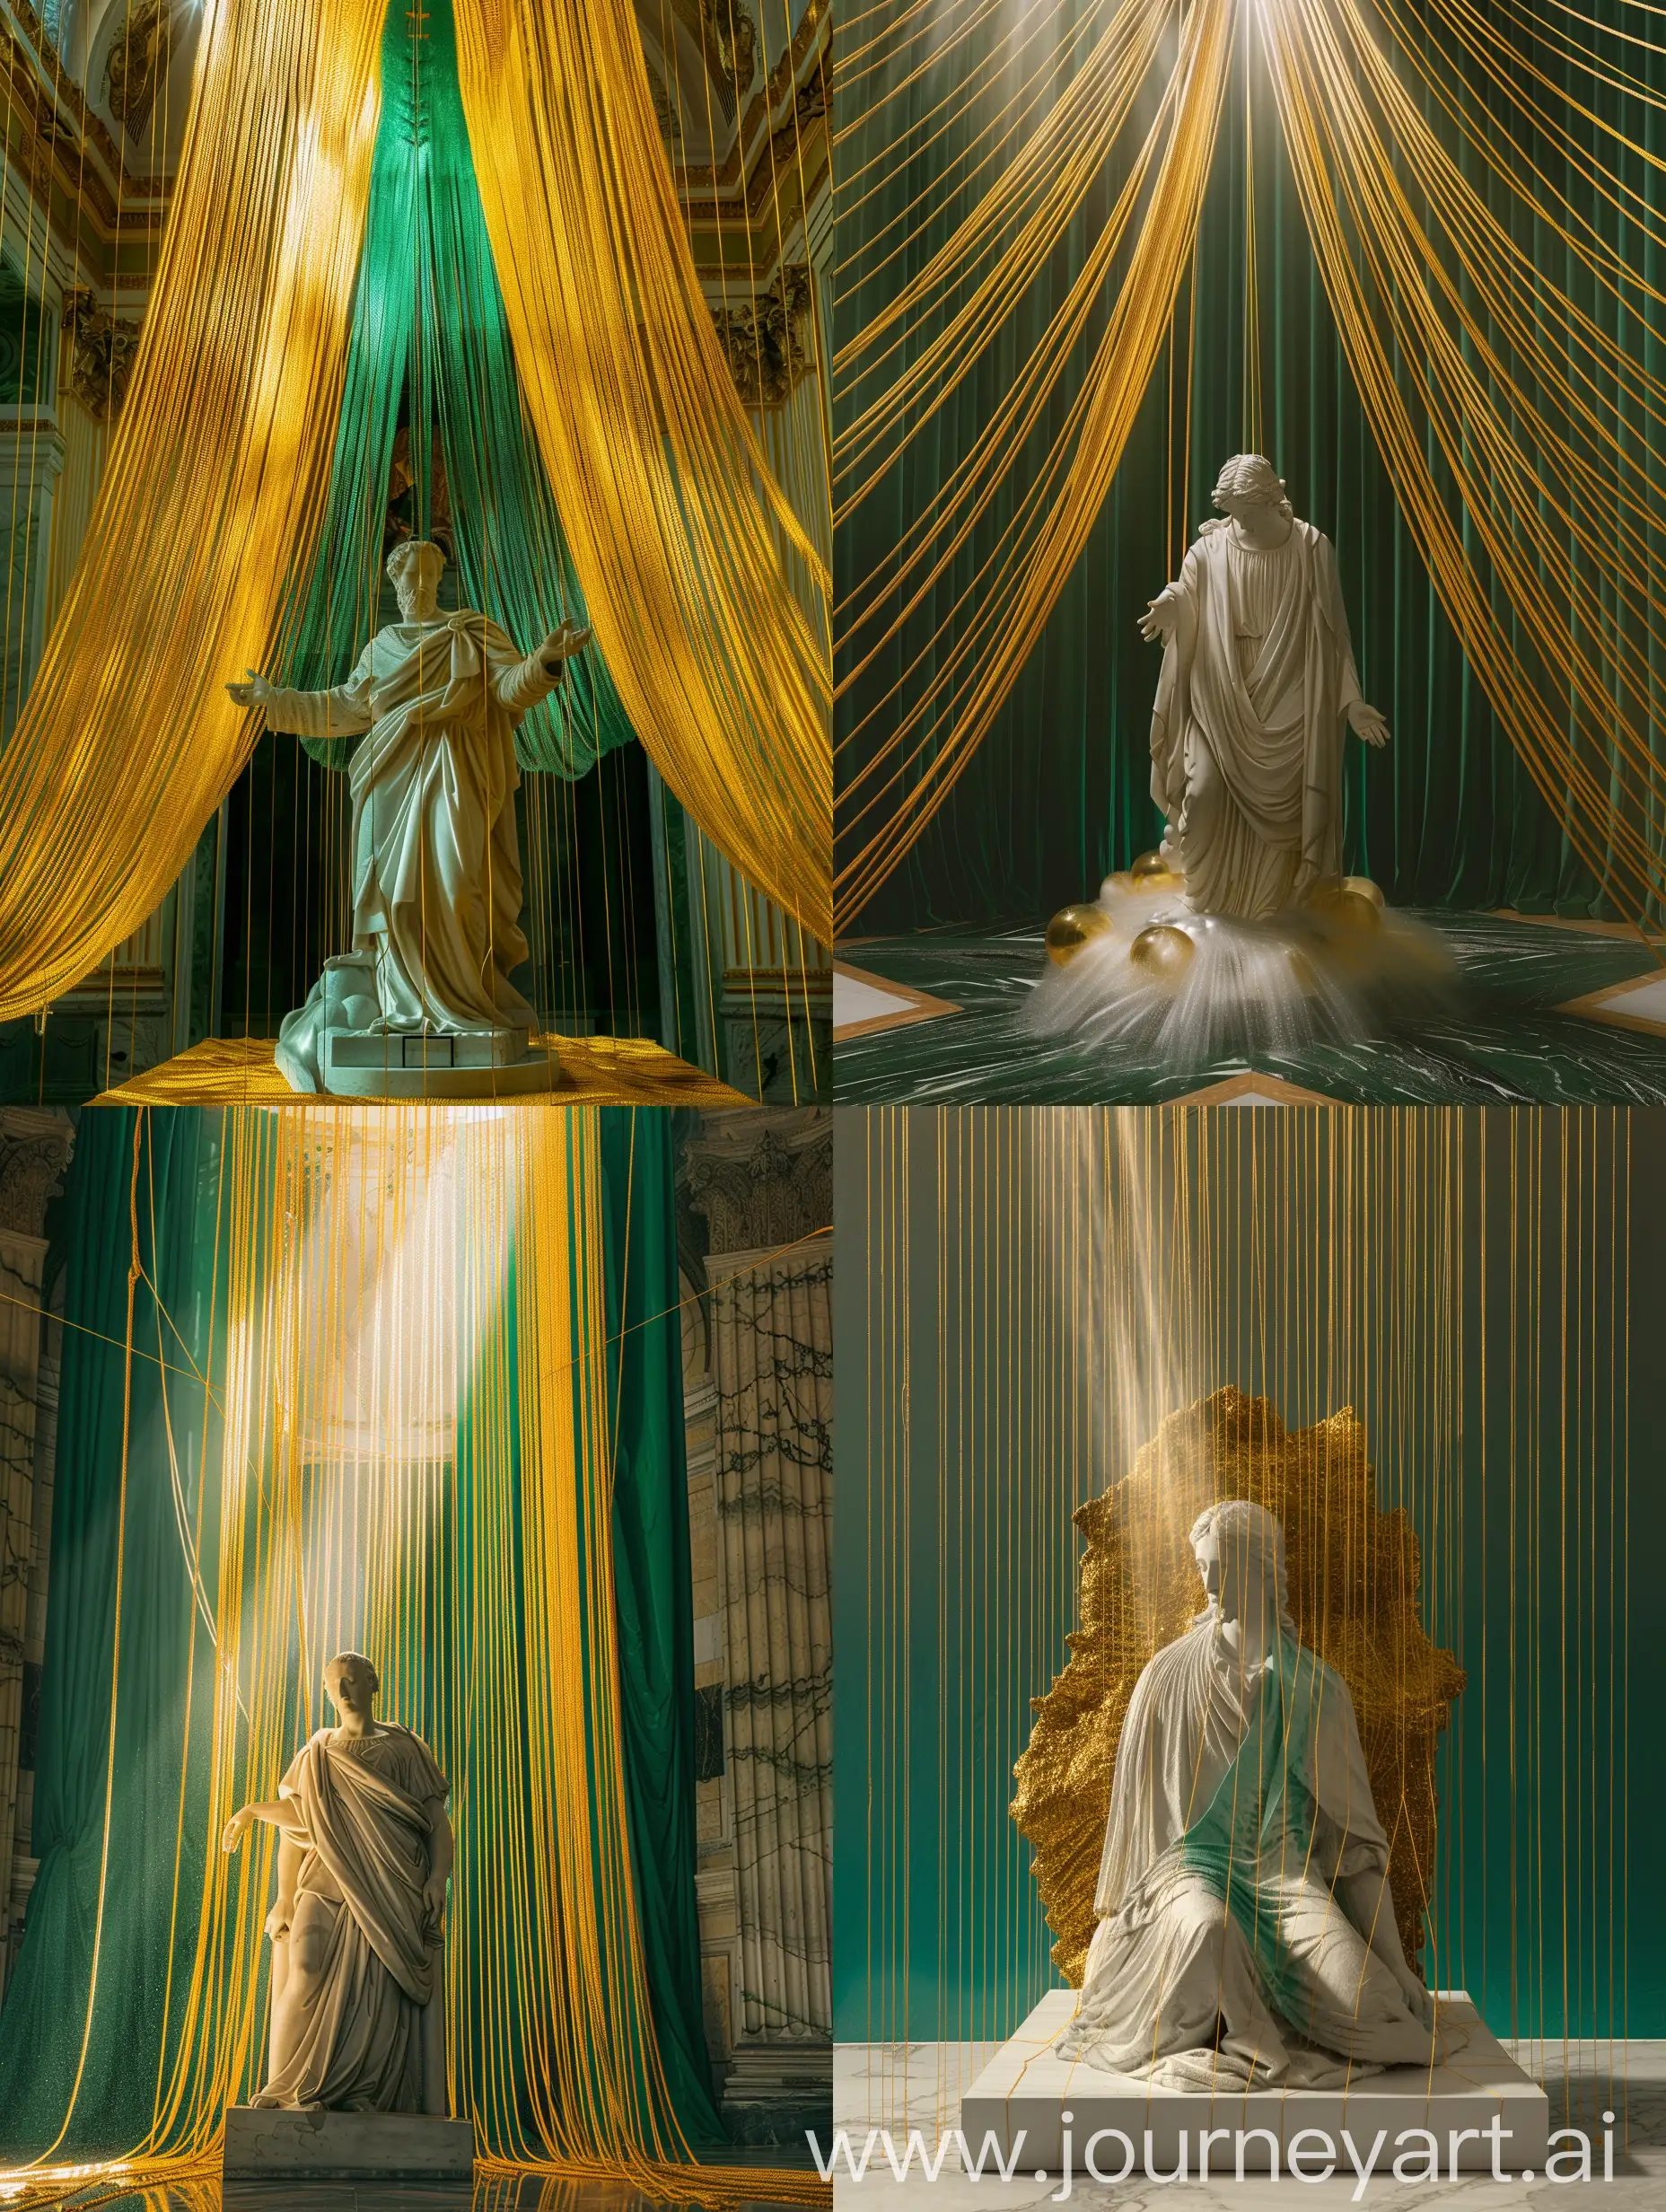 a statue is underneath the golden strings., in the style of light white and dark emerald, christian art and architecture, use of ephemeral materials, photography installations, caravaggesque, god rays, yellow and bronze